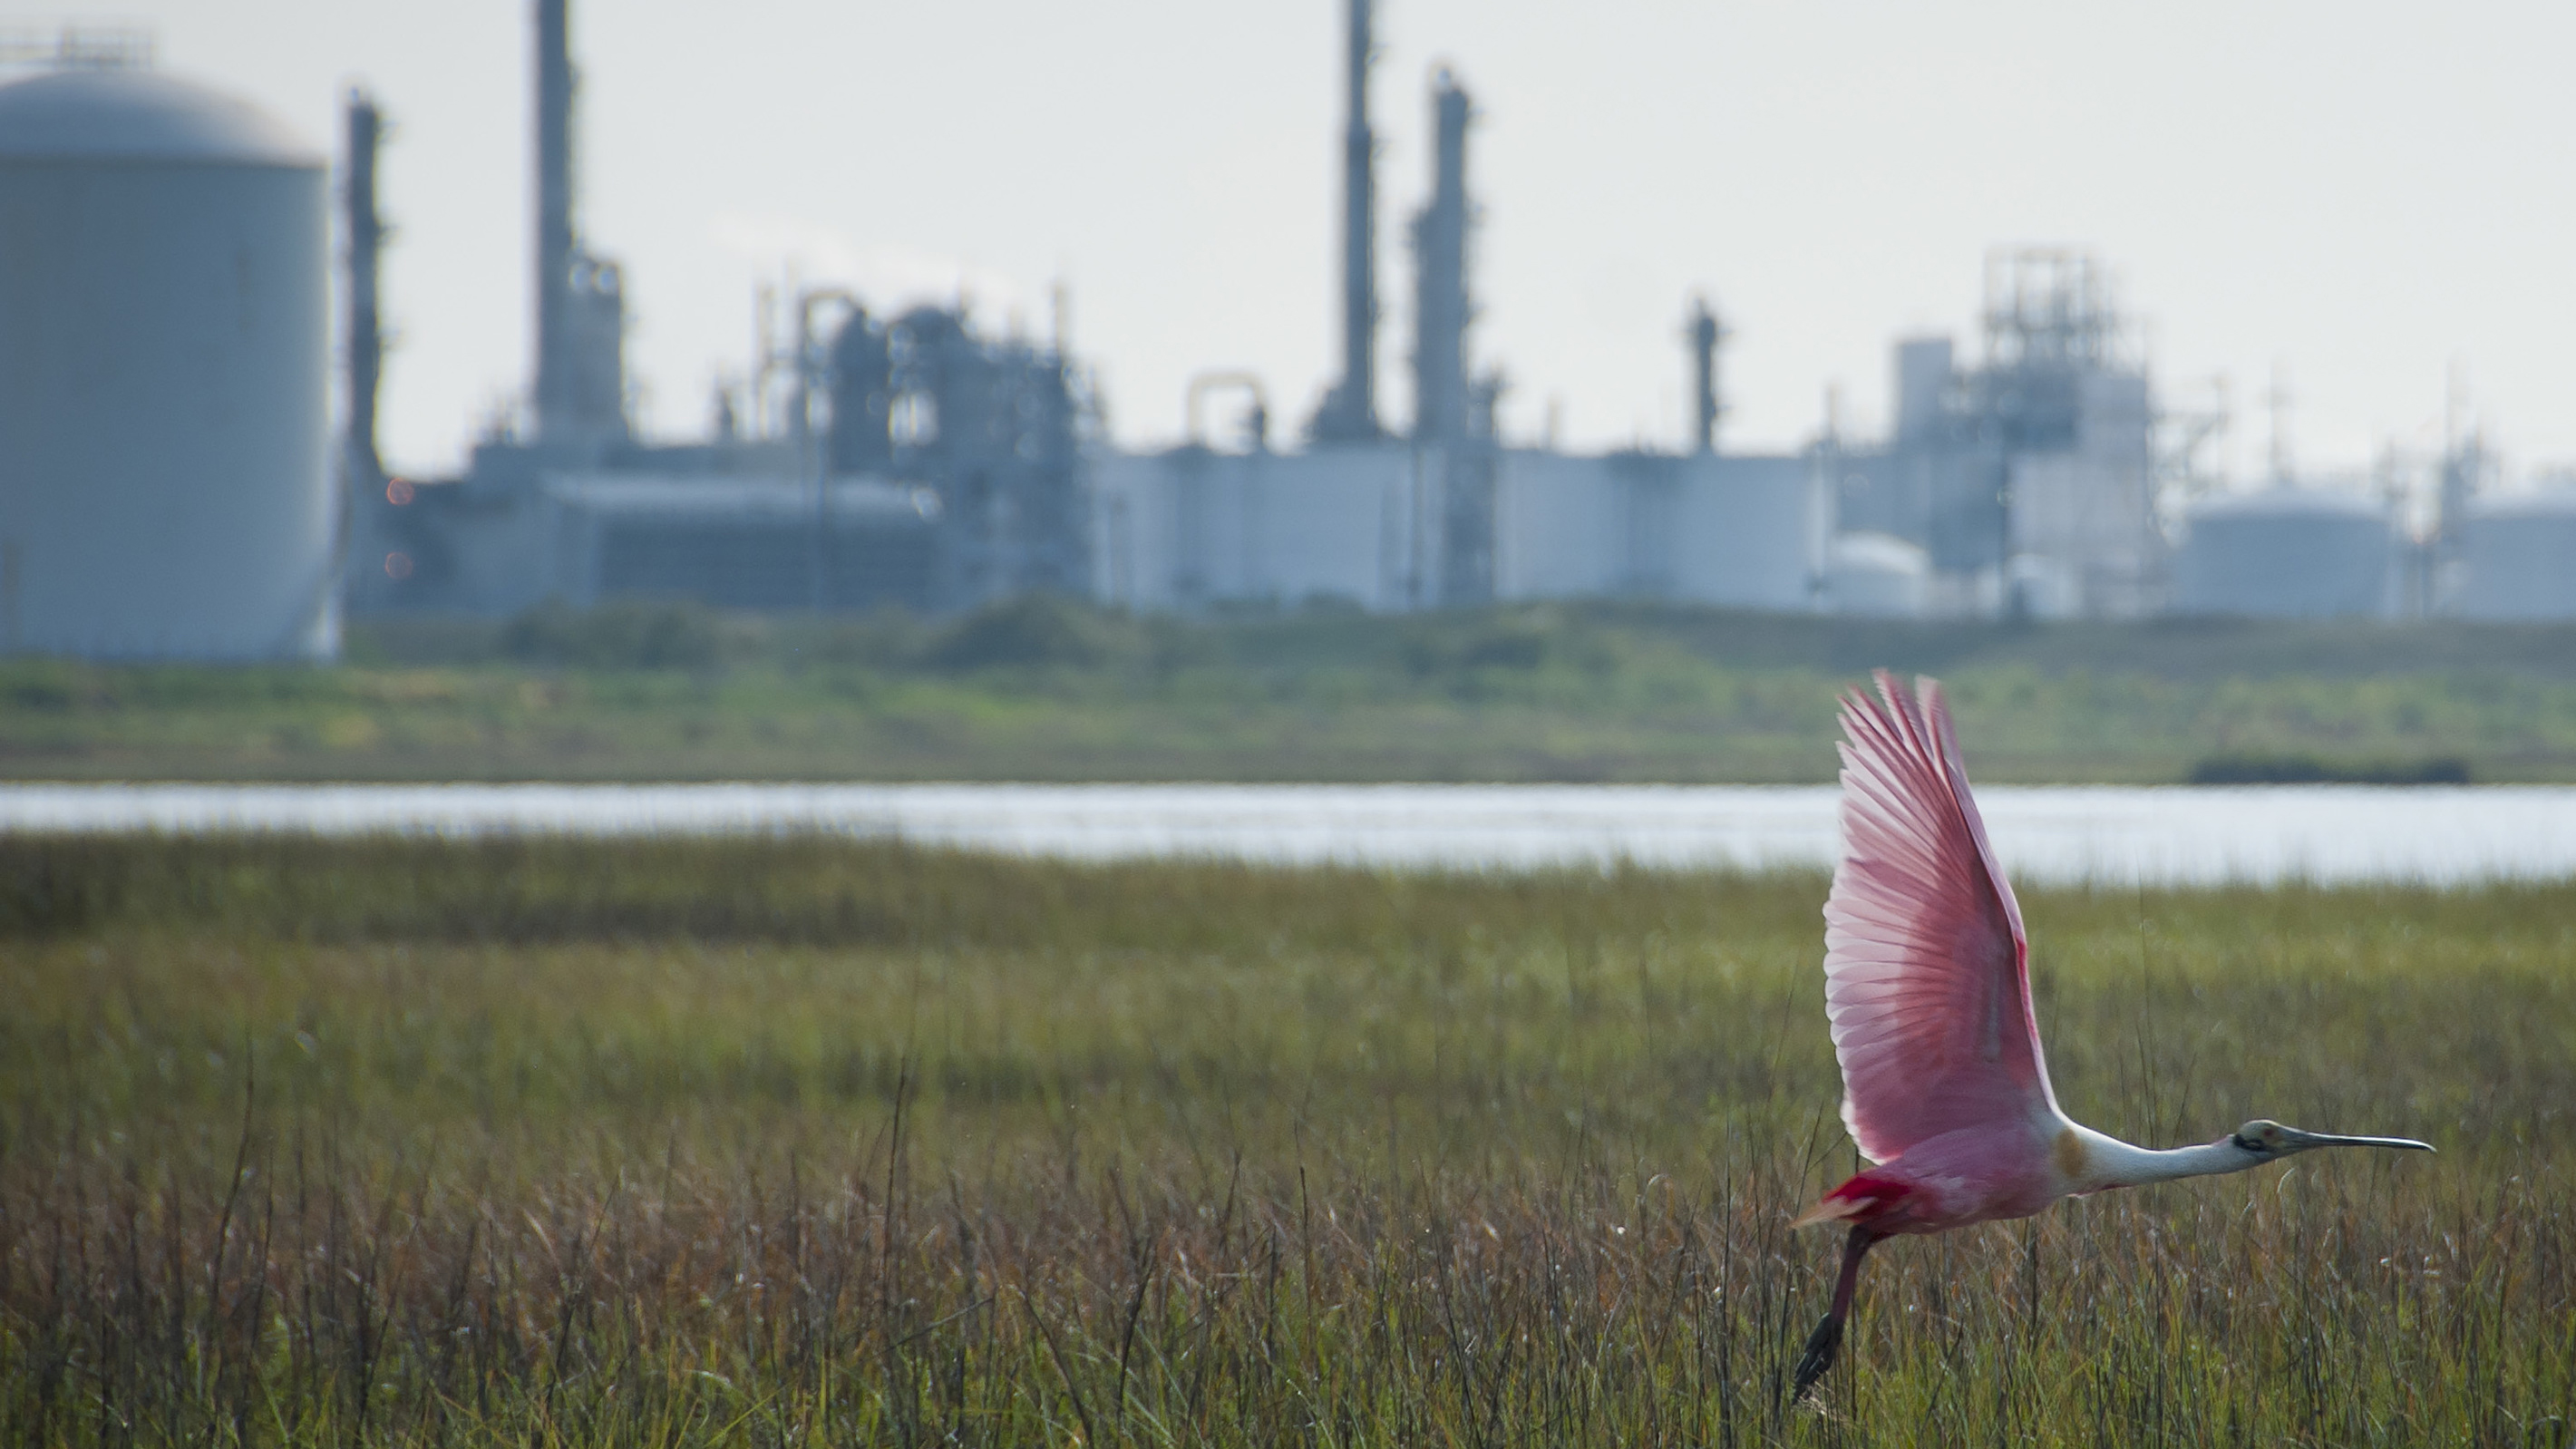 The DOW Chemical plant in Freeport, Texas. Photo: Jen Molnar/TNC